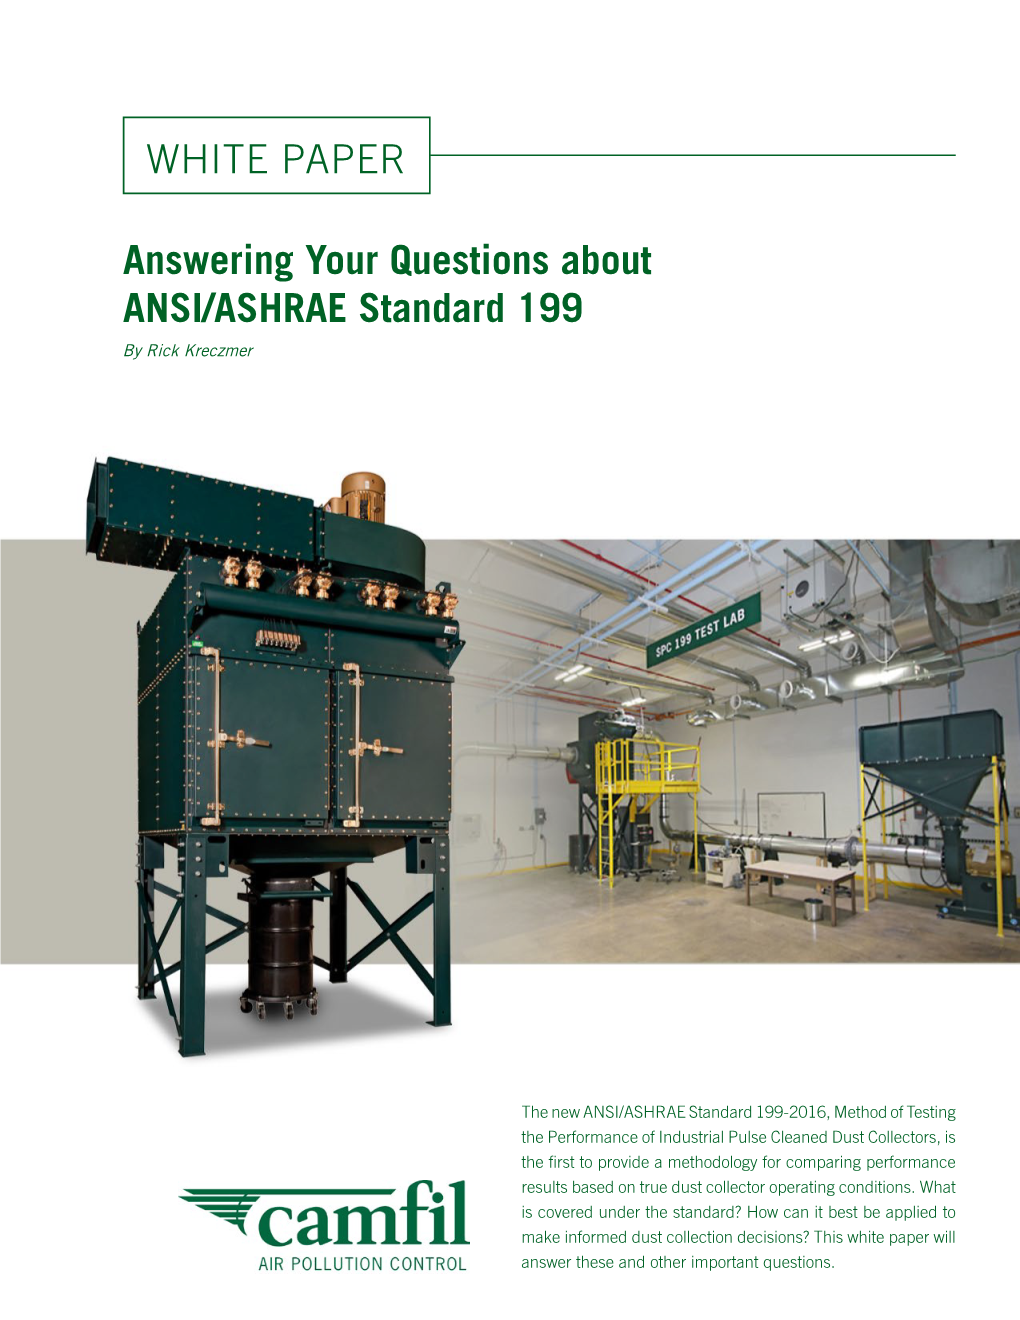 Answering Your Questions About ANSI/ASHRAE Standard 199 by Rick Kreczmer